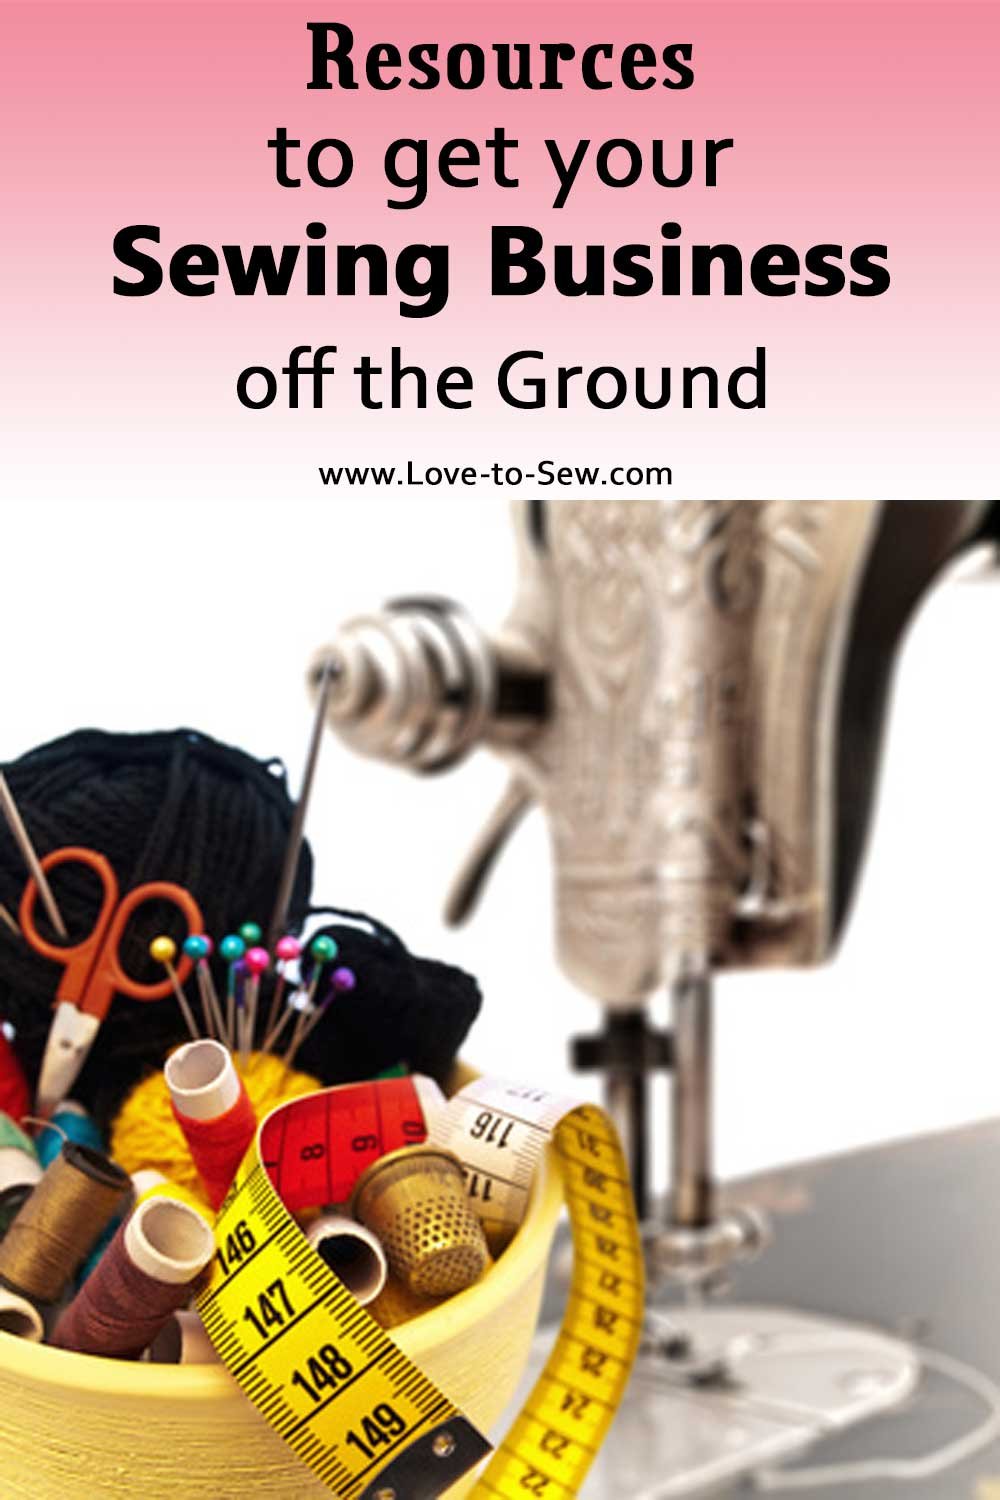 Resources to Get your Sewing Business off the Ground